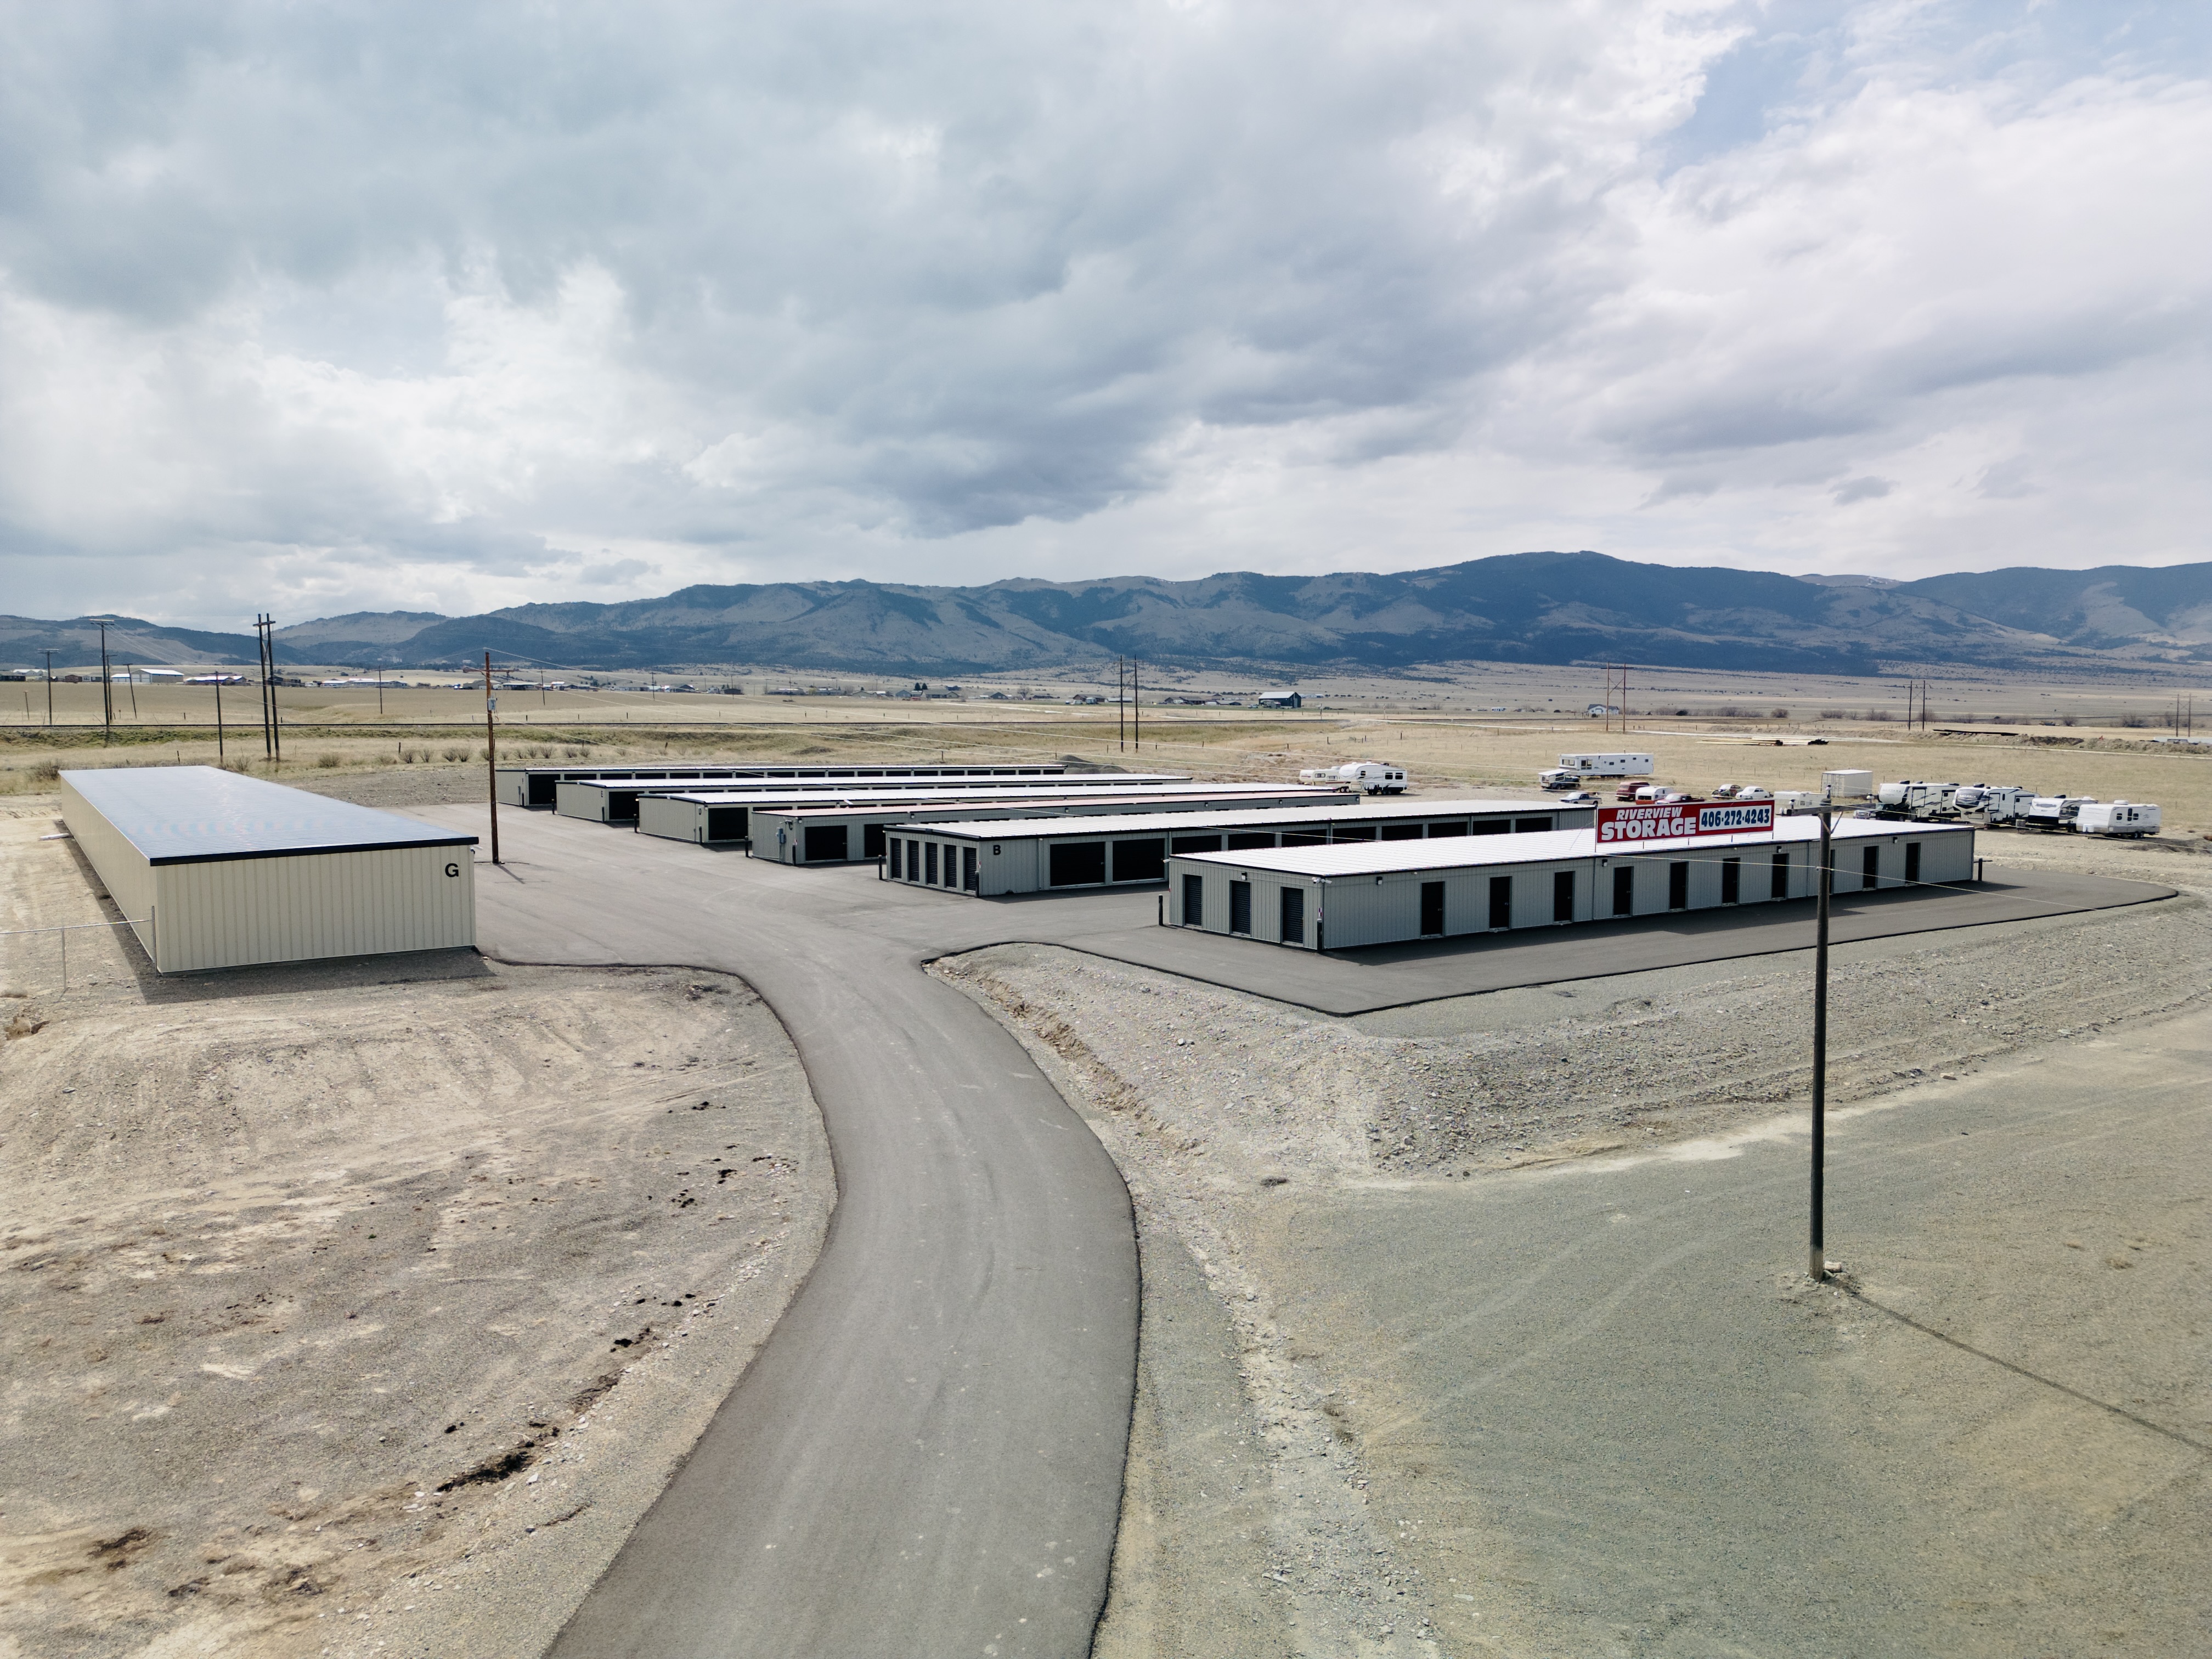 Self Storage Units & Outdoor Parking Boat/RV/Vehicle Parking in Townsend, MT 59644